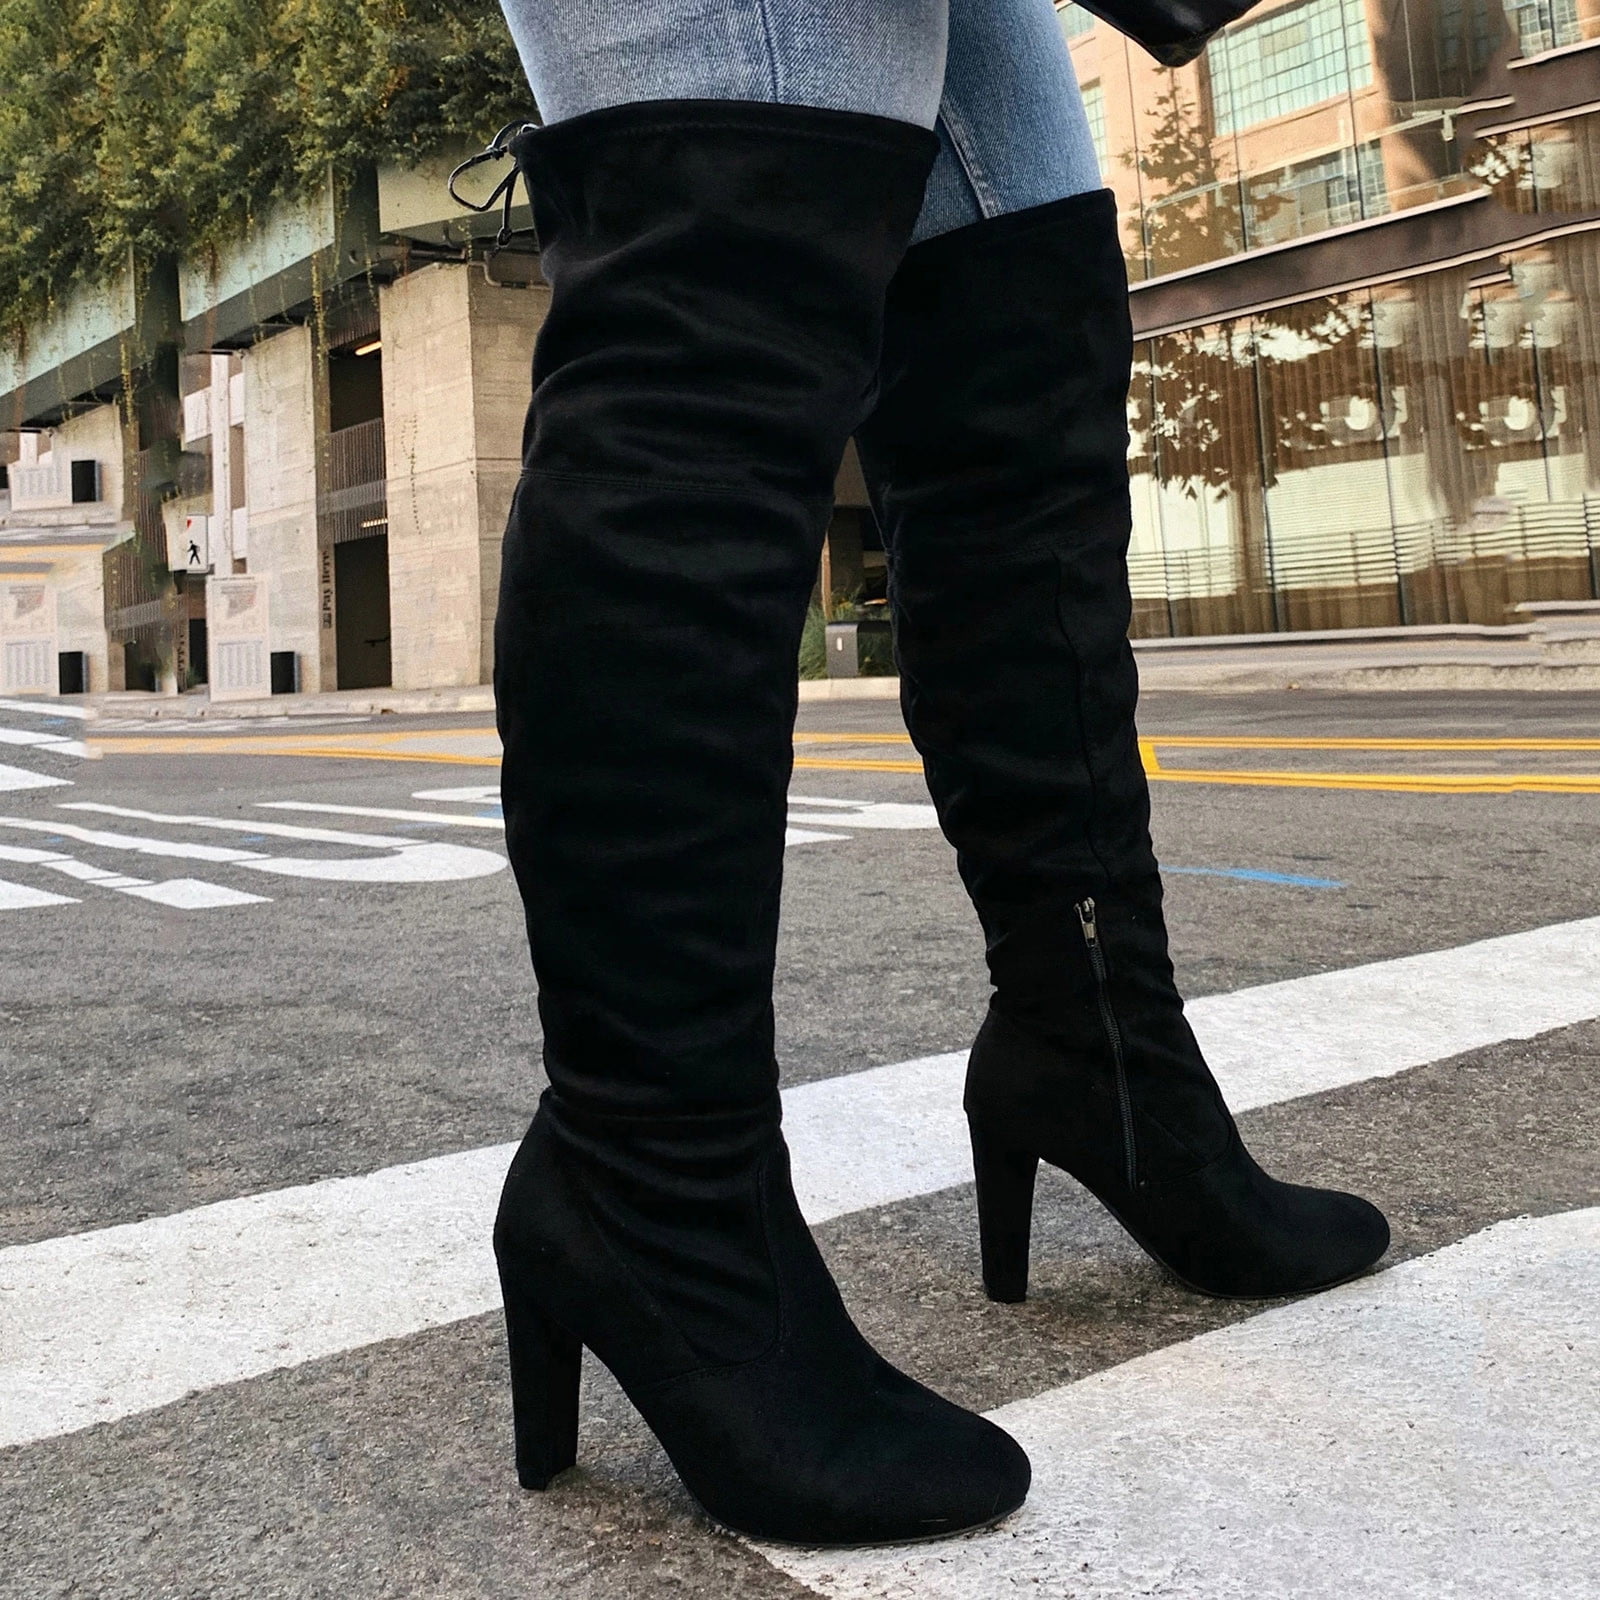 Buy Knee High Boots For Women With Heels online | Lazada.com.ph-sieuthinhanong.vn